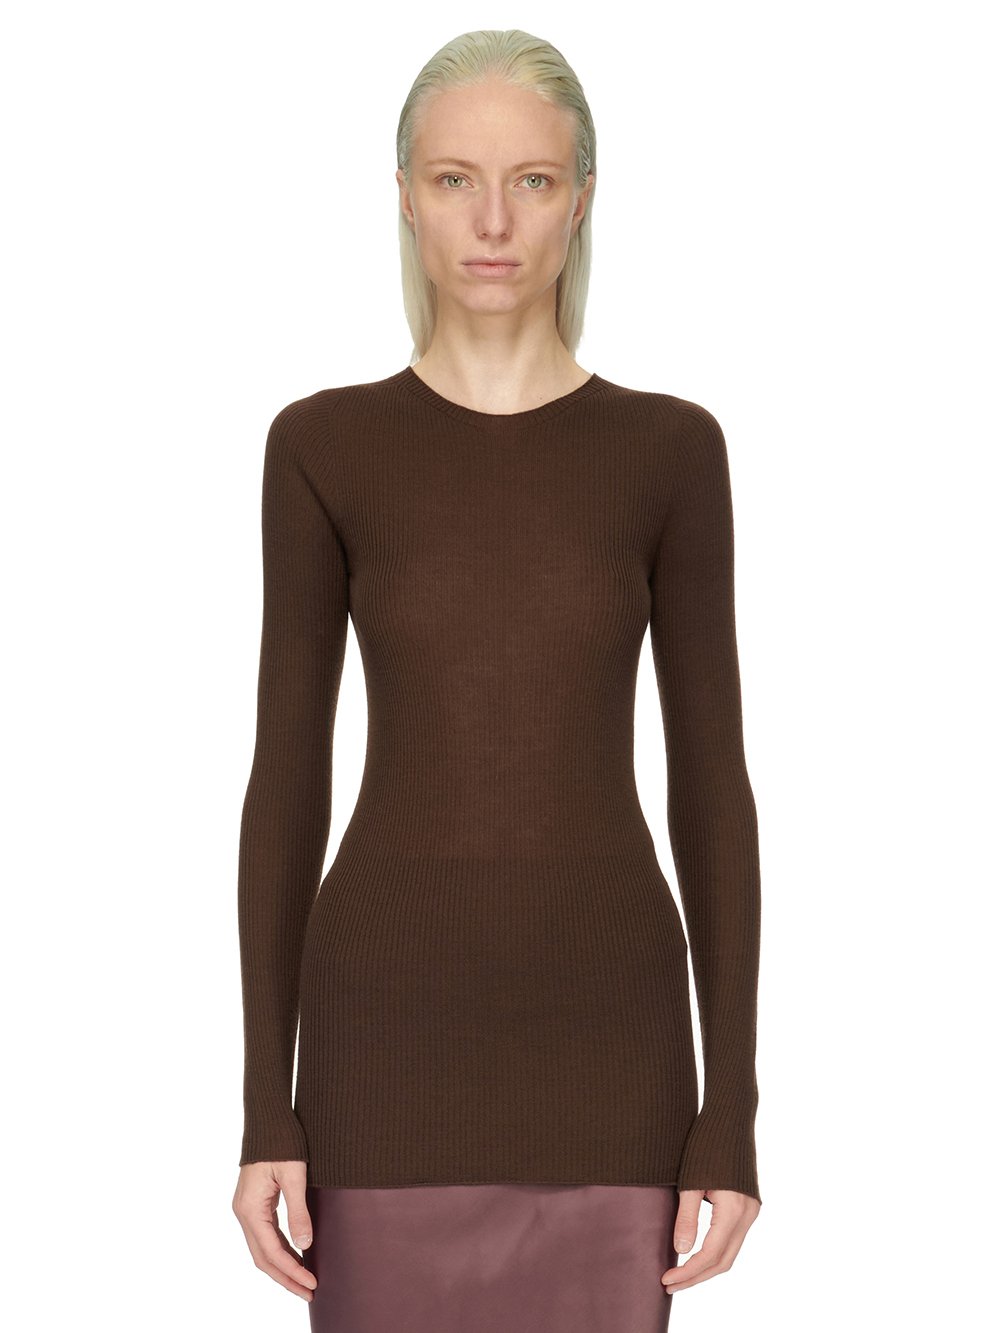 RICK OWENS FW23 LUXOR RIBBED ROUND NECK IN BROWN LIGHTWEIGHT RIBBED KNIT